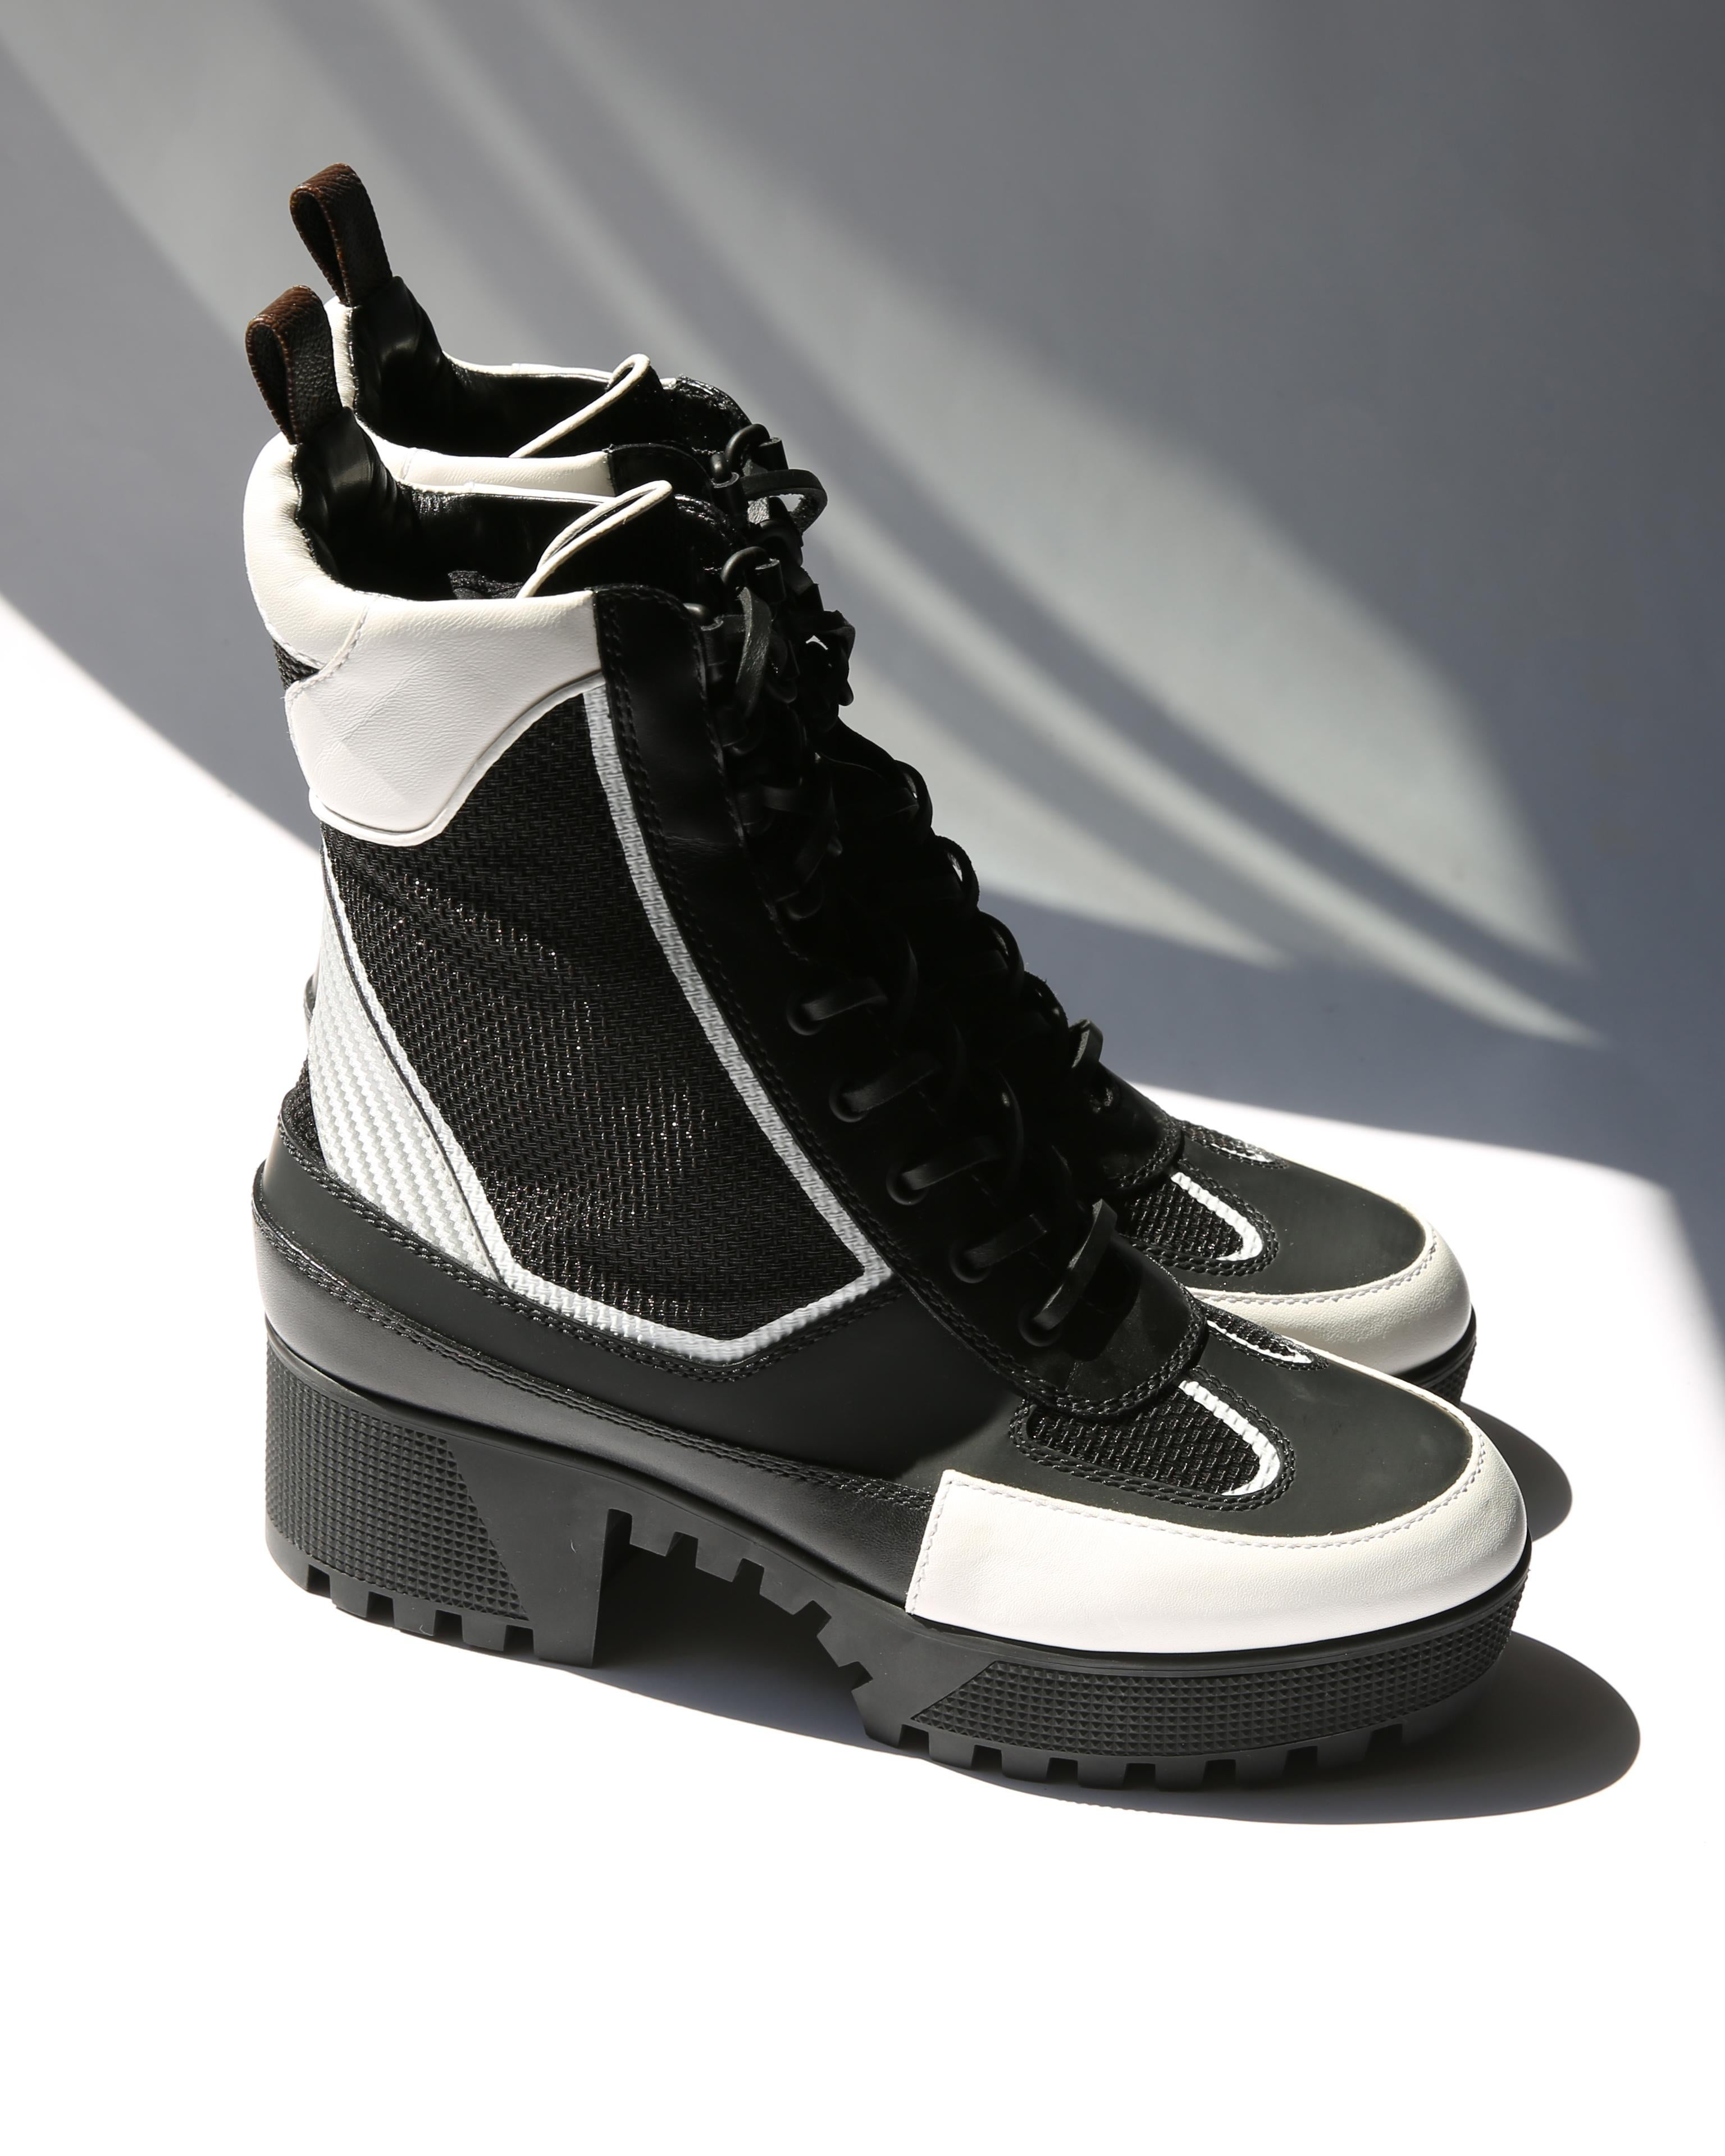 Louis Vuitton platform Laureate Desert ankle boots
Black and white in leather and mesh lace up boots with a block heel
Come with their dust bag, care card and receipt
These have only been tried on within the home and are in fact new
Some slight